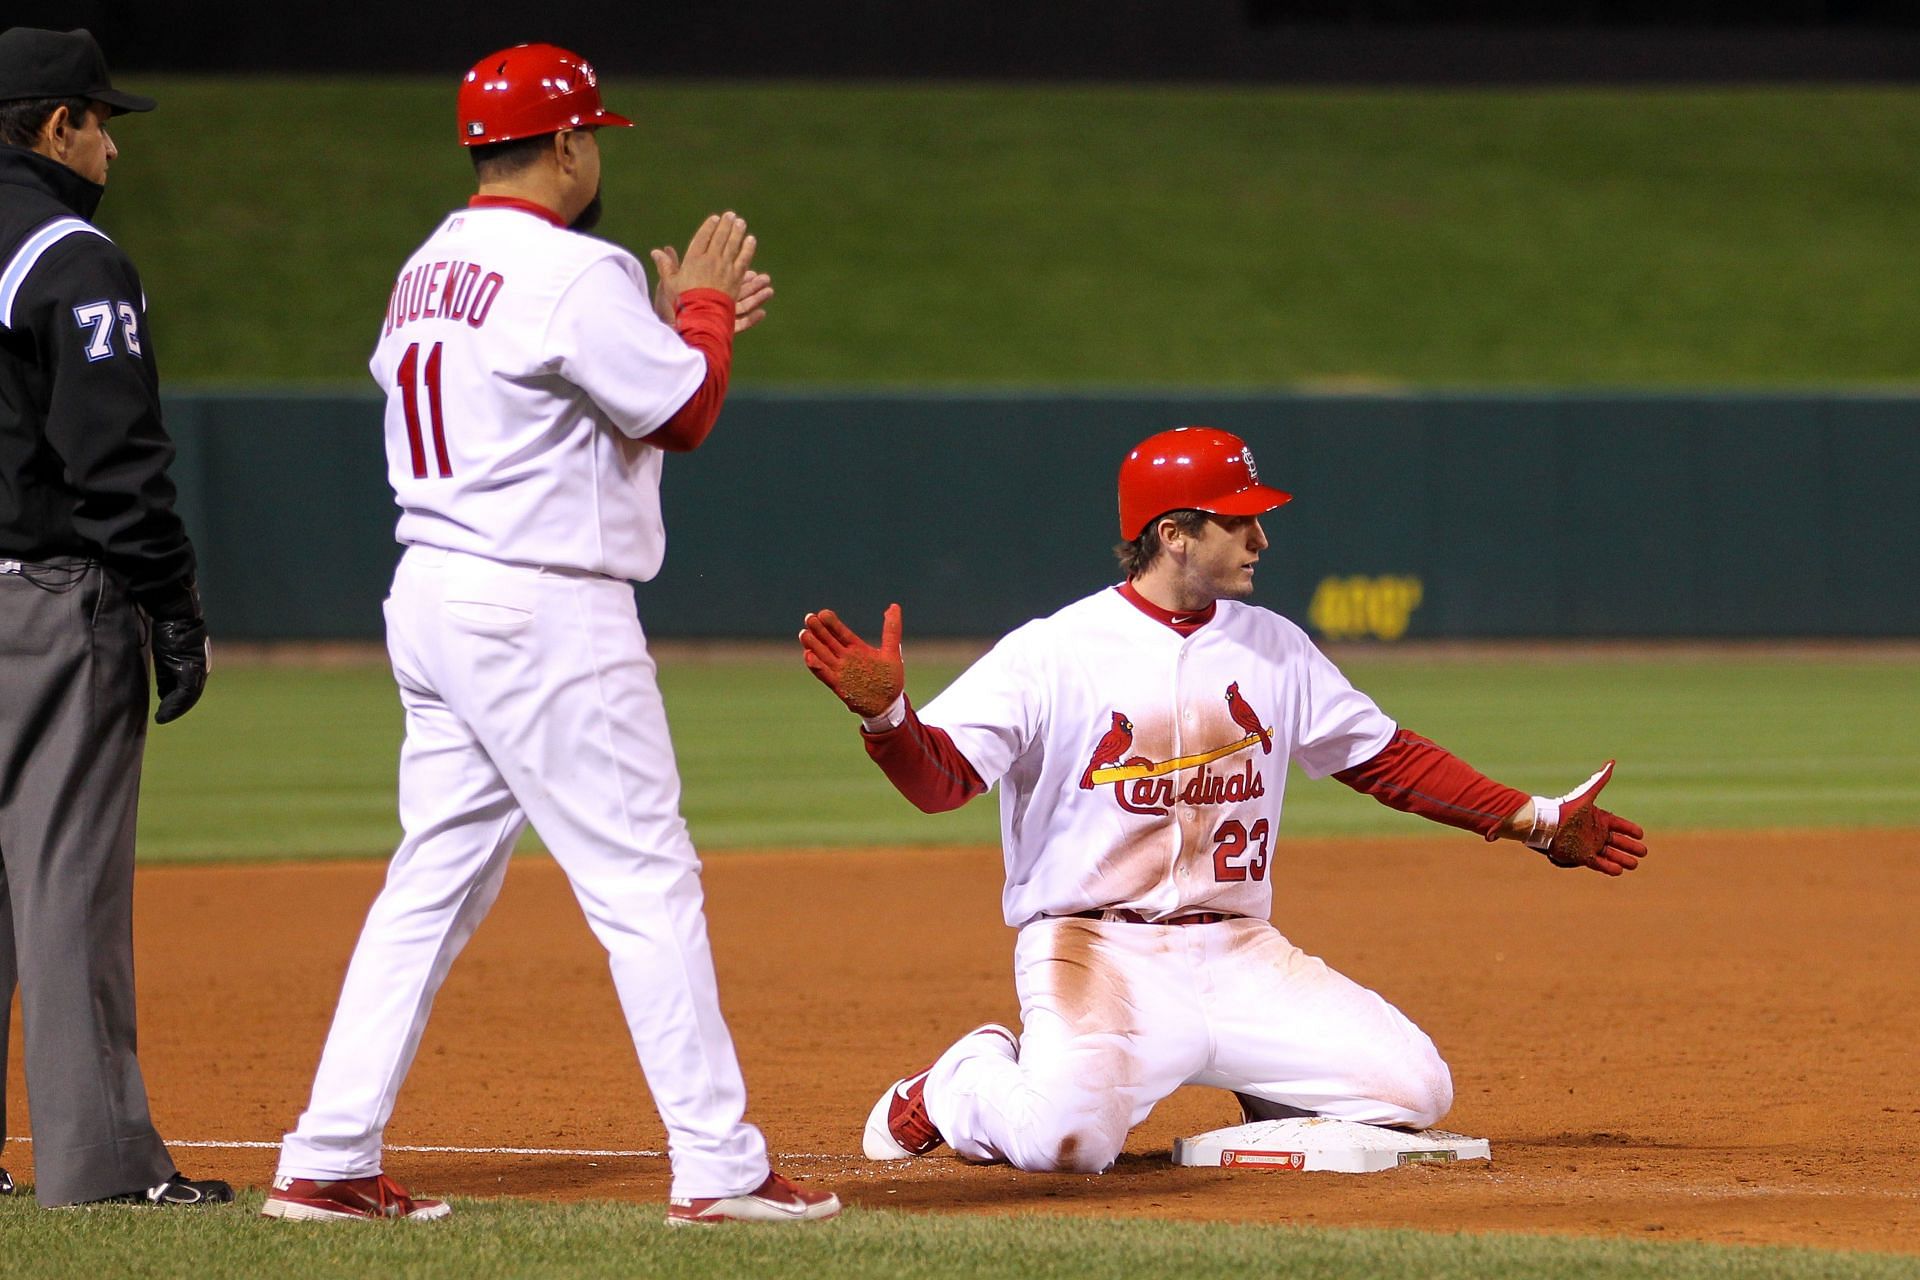 Three non-David Freese moments that made the Cardinals' unexpected